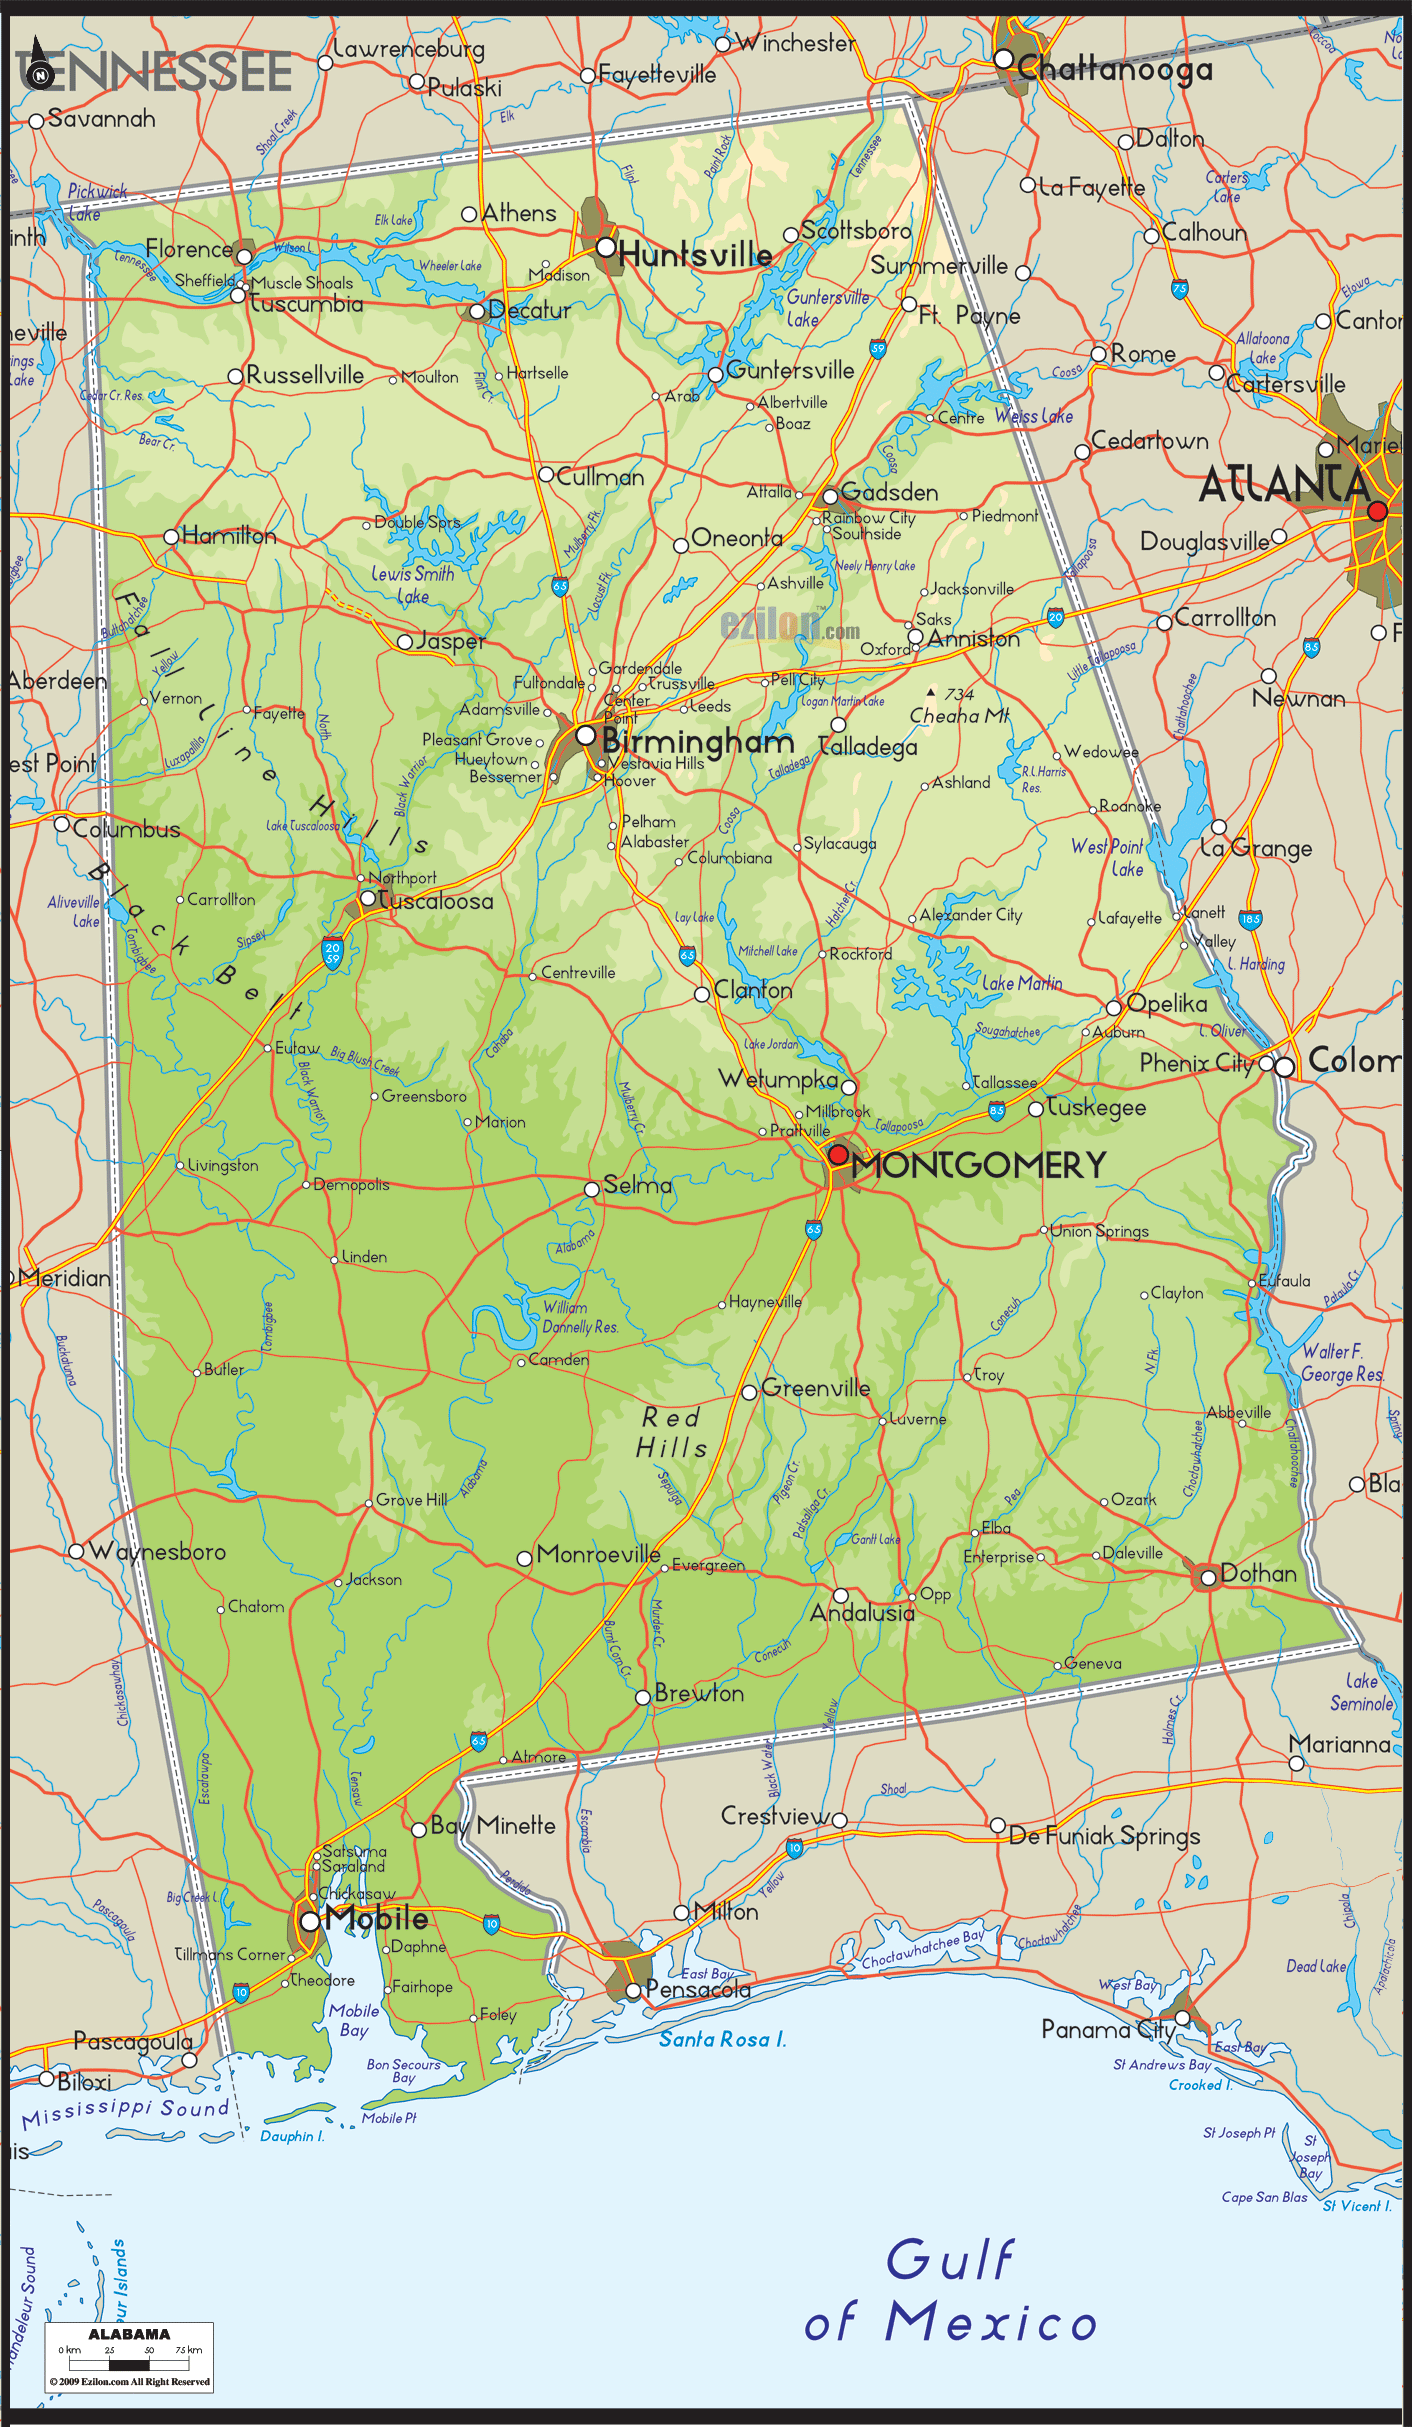 Physical map of Alabama showing major geographical features such as rivers, lakes, mountains, hills, topography and land formations.